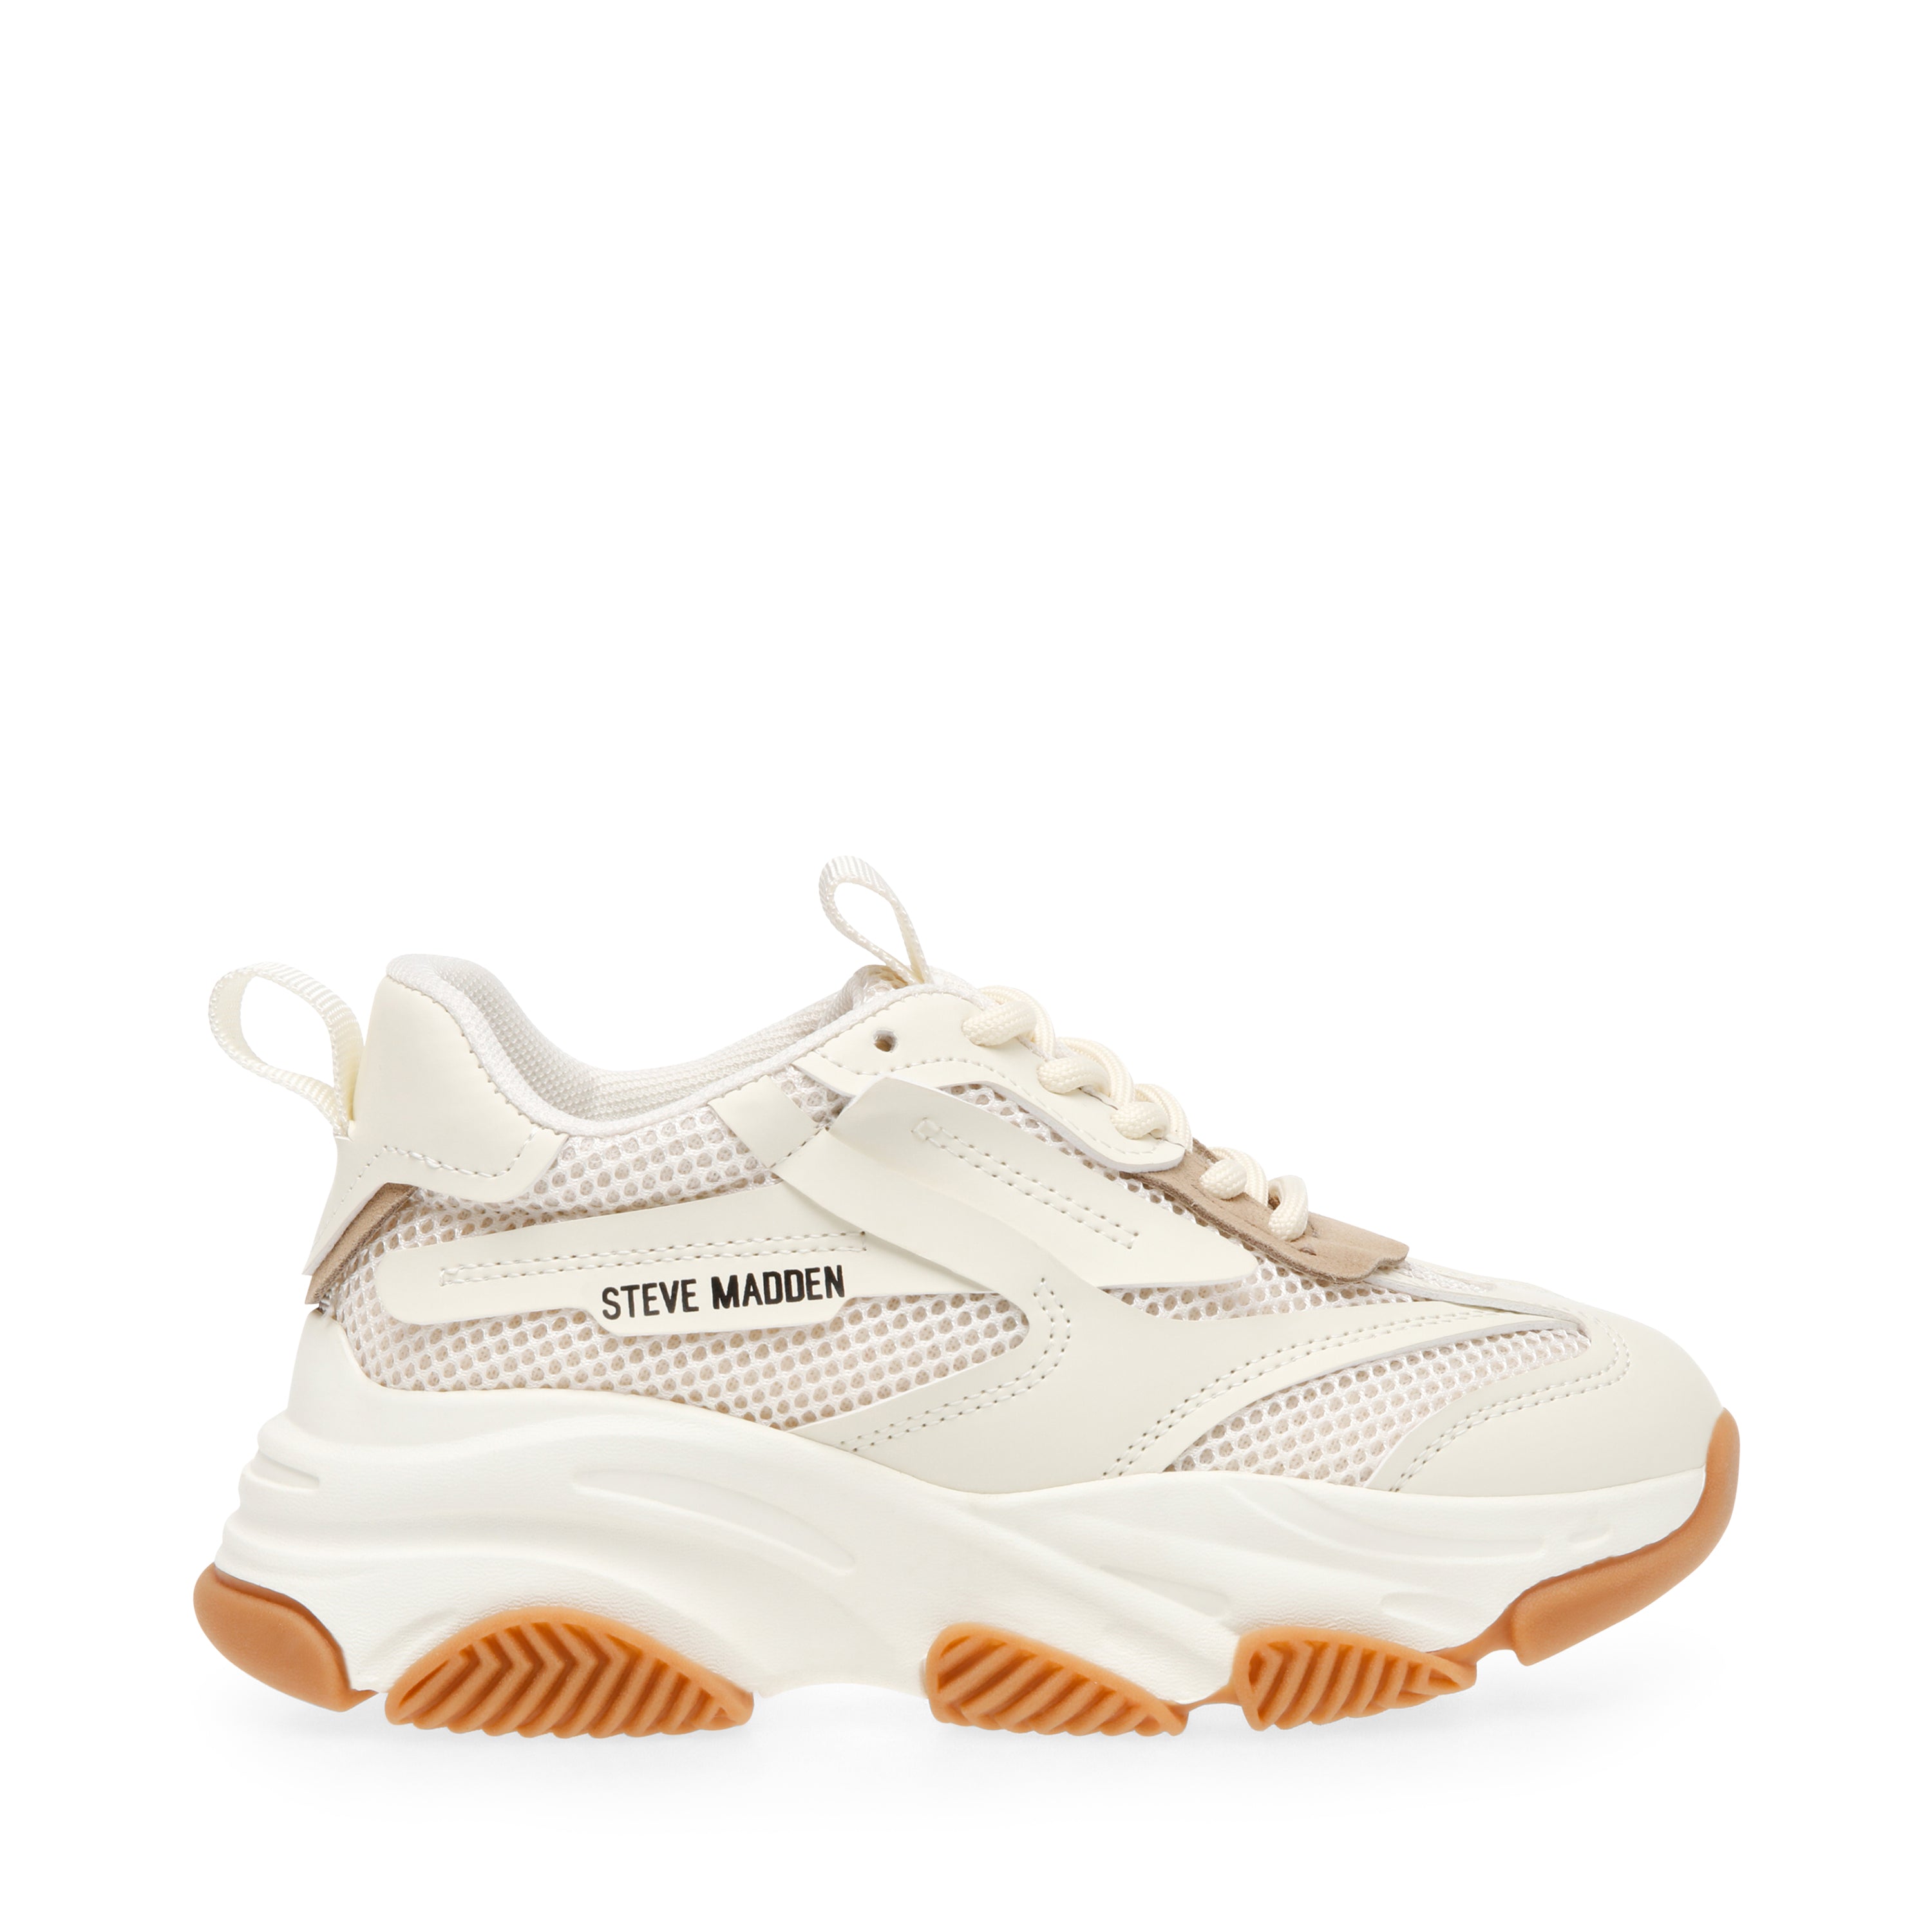 Kids Trainers | Steve Madden UK® Official Site